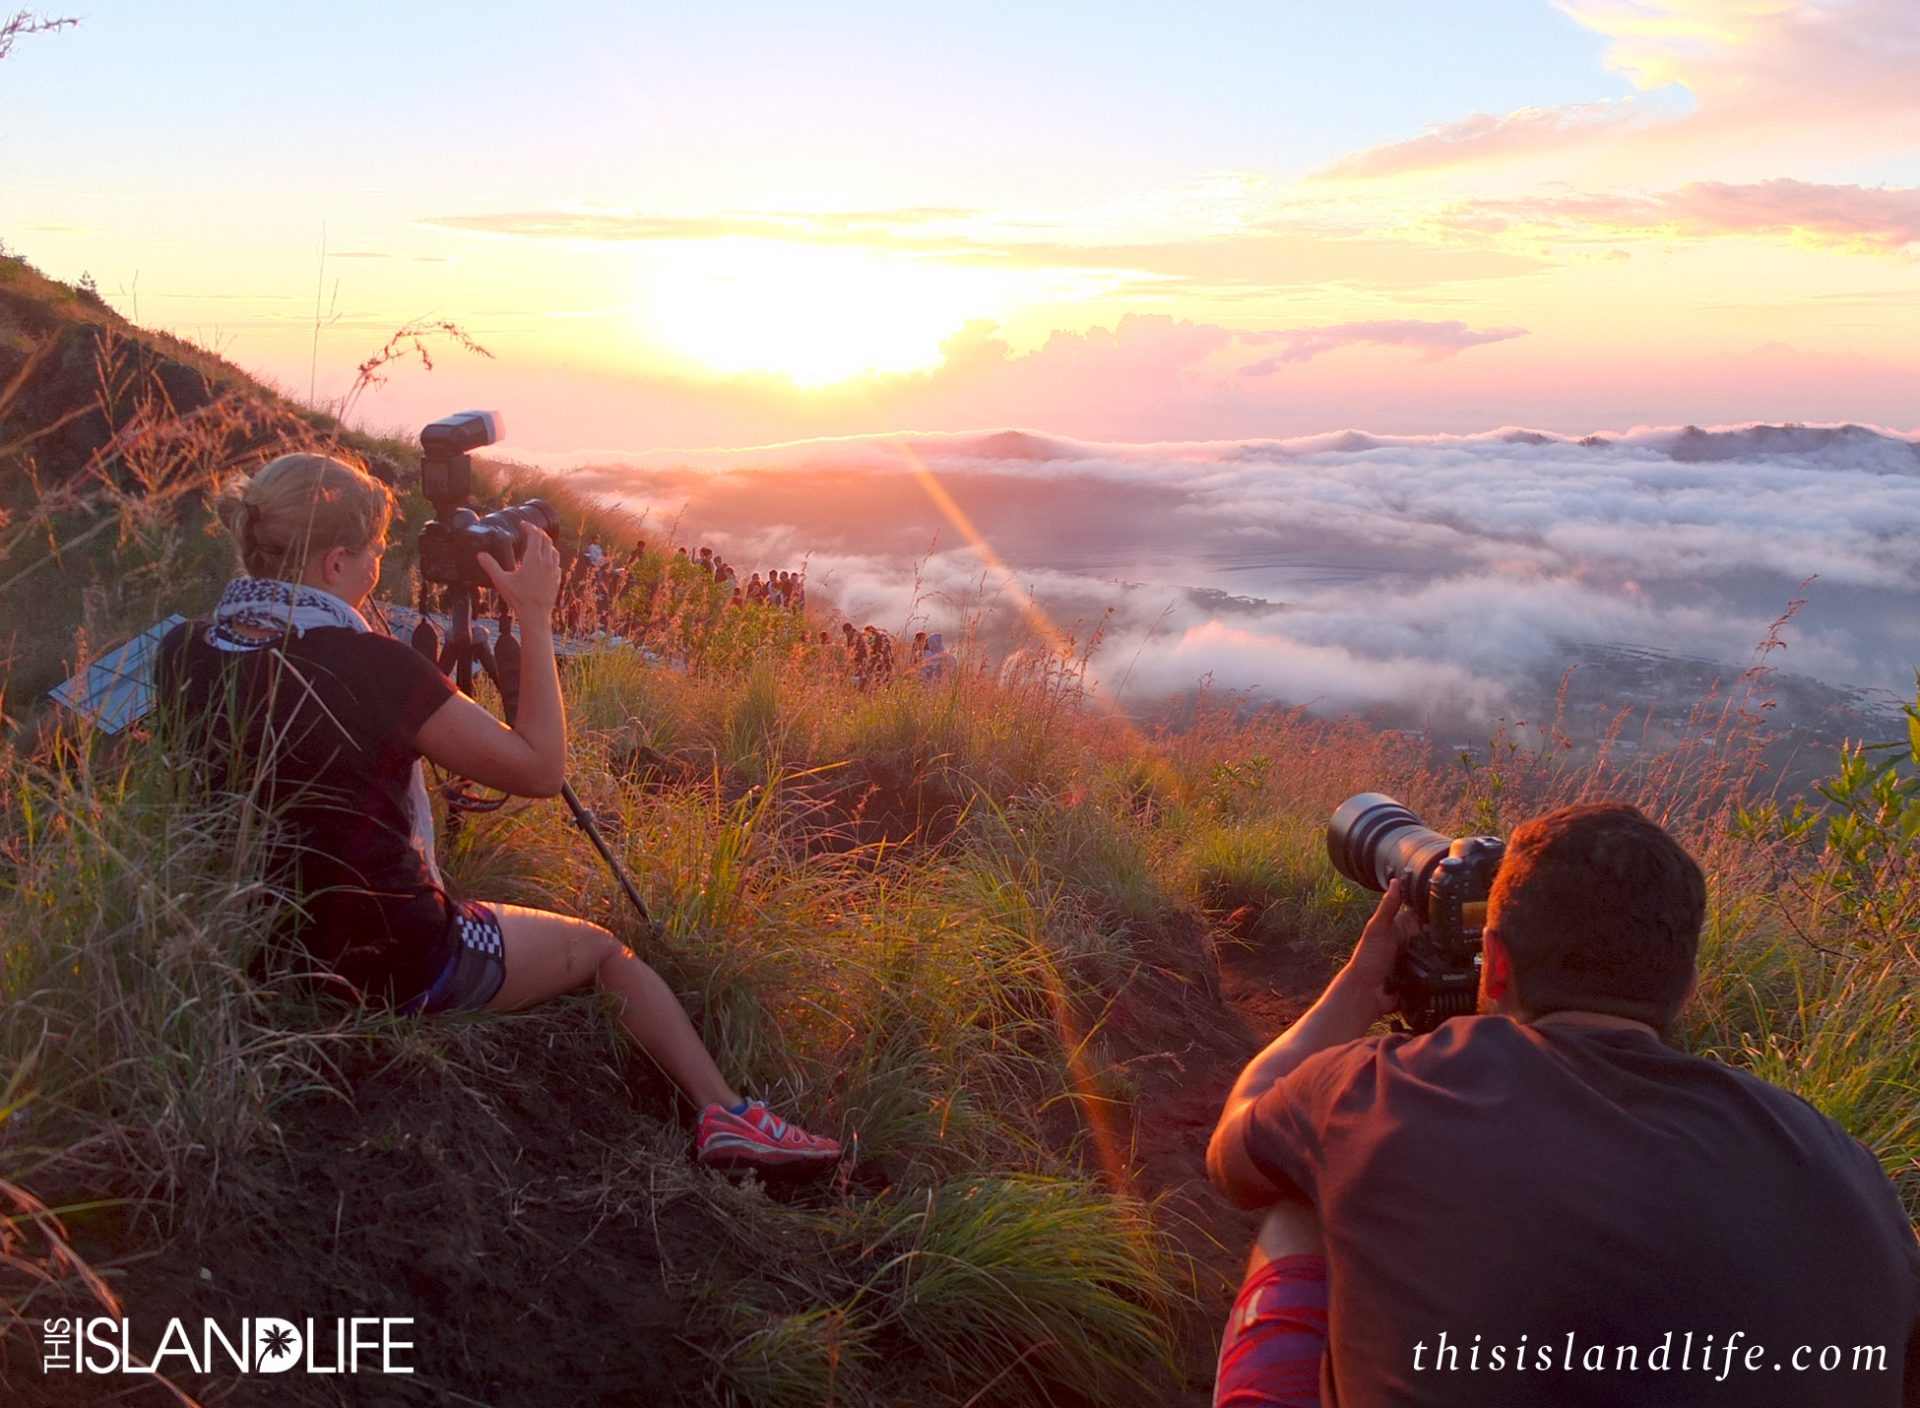 THIS ISLAND LIFE | Mount Batur | The four best places to watch the sunrise in Bali, Indonesia